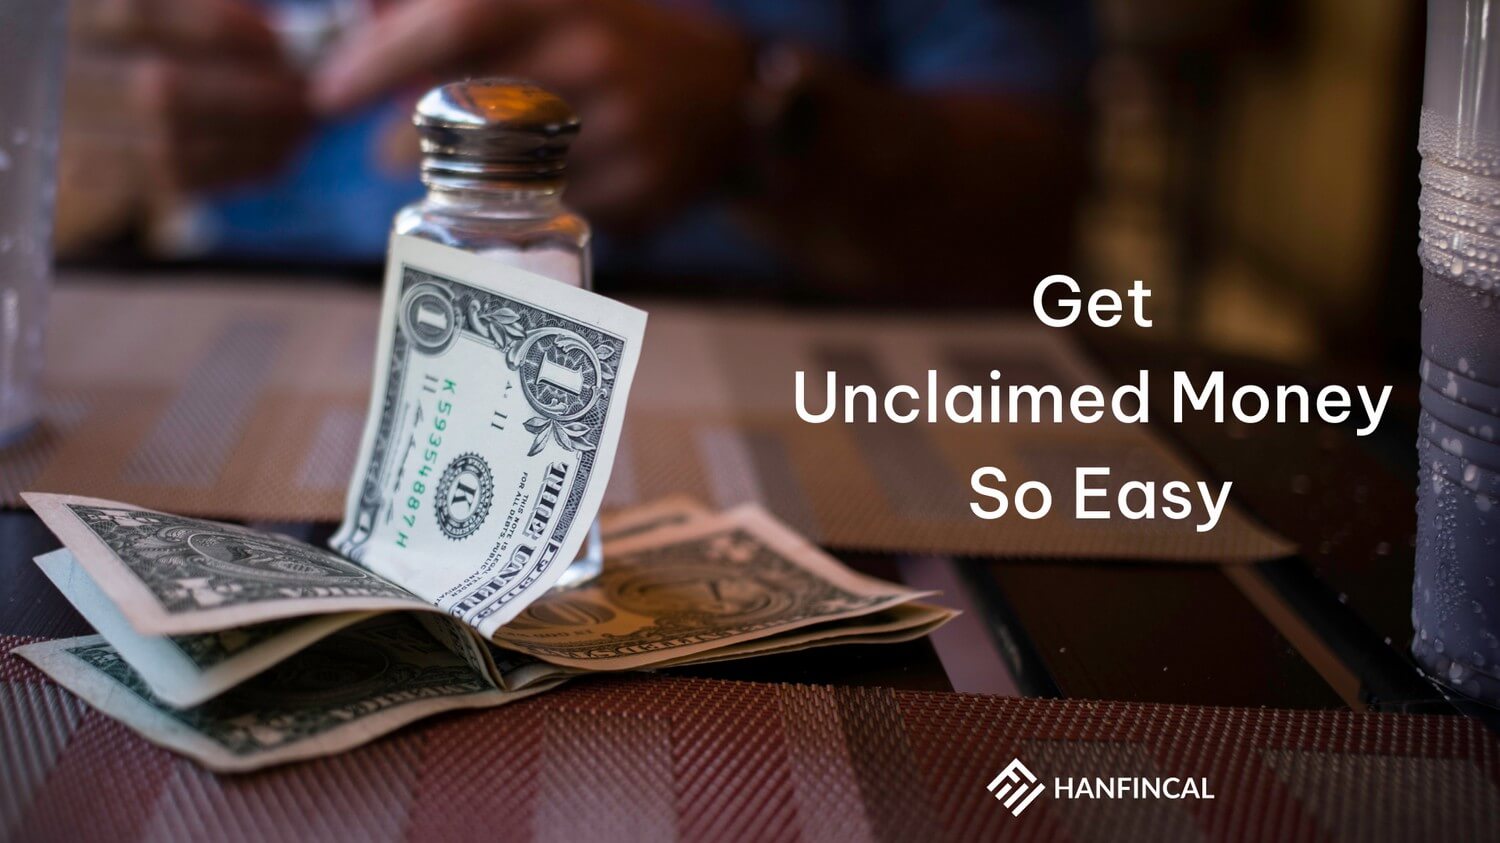 Get Unclaimed Money So Easy